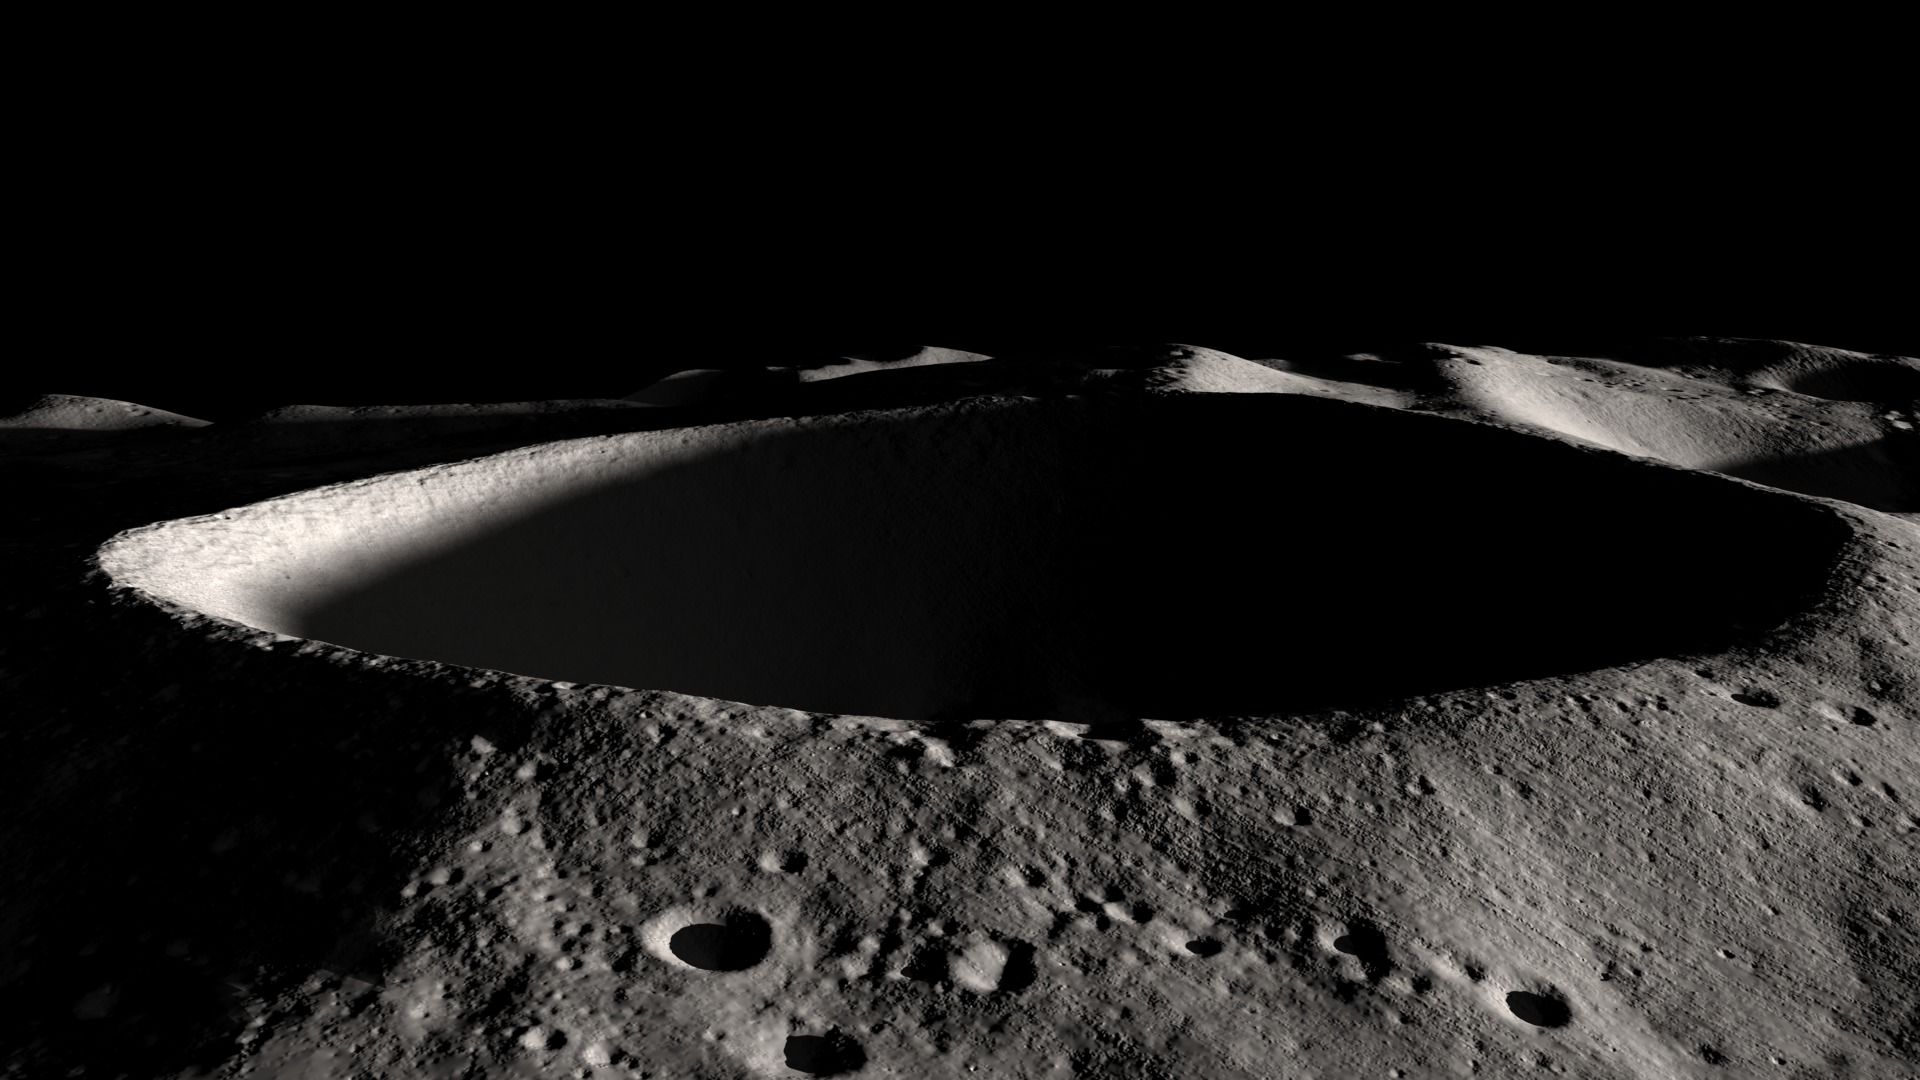 Shackleton crater, at the Moon's south pole, has a floor that never sees sunlight. This is an excellent place to look for water ice. Credit: NASA/Goddard Space Flight Center Scientific Visualization Studio